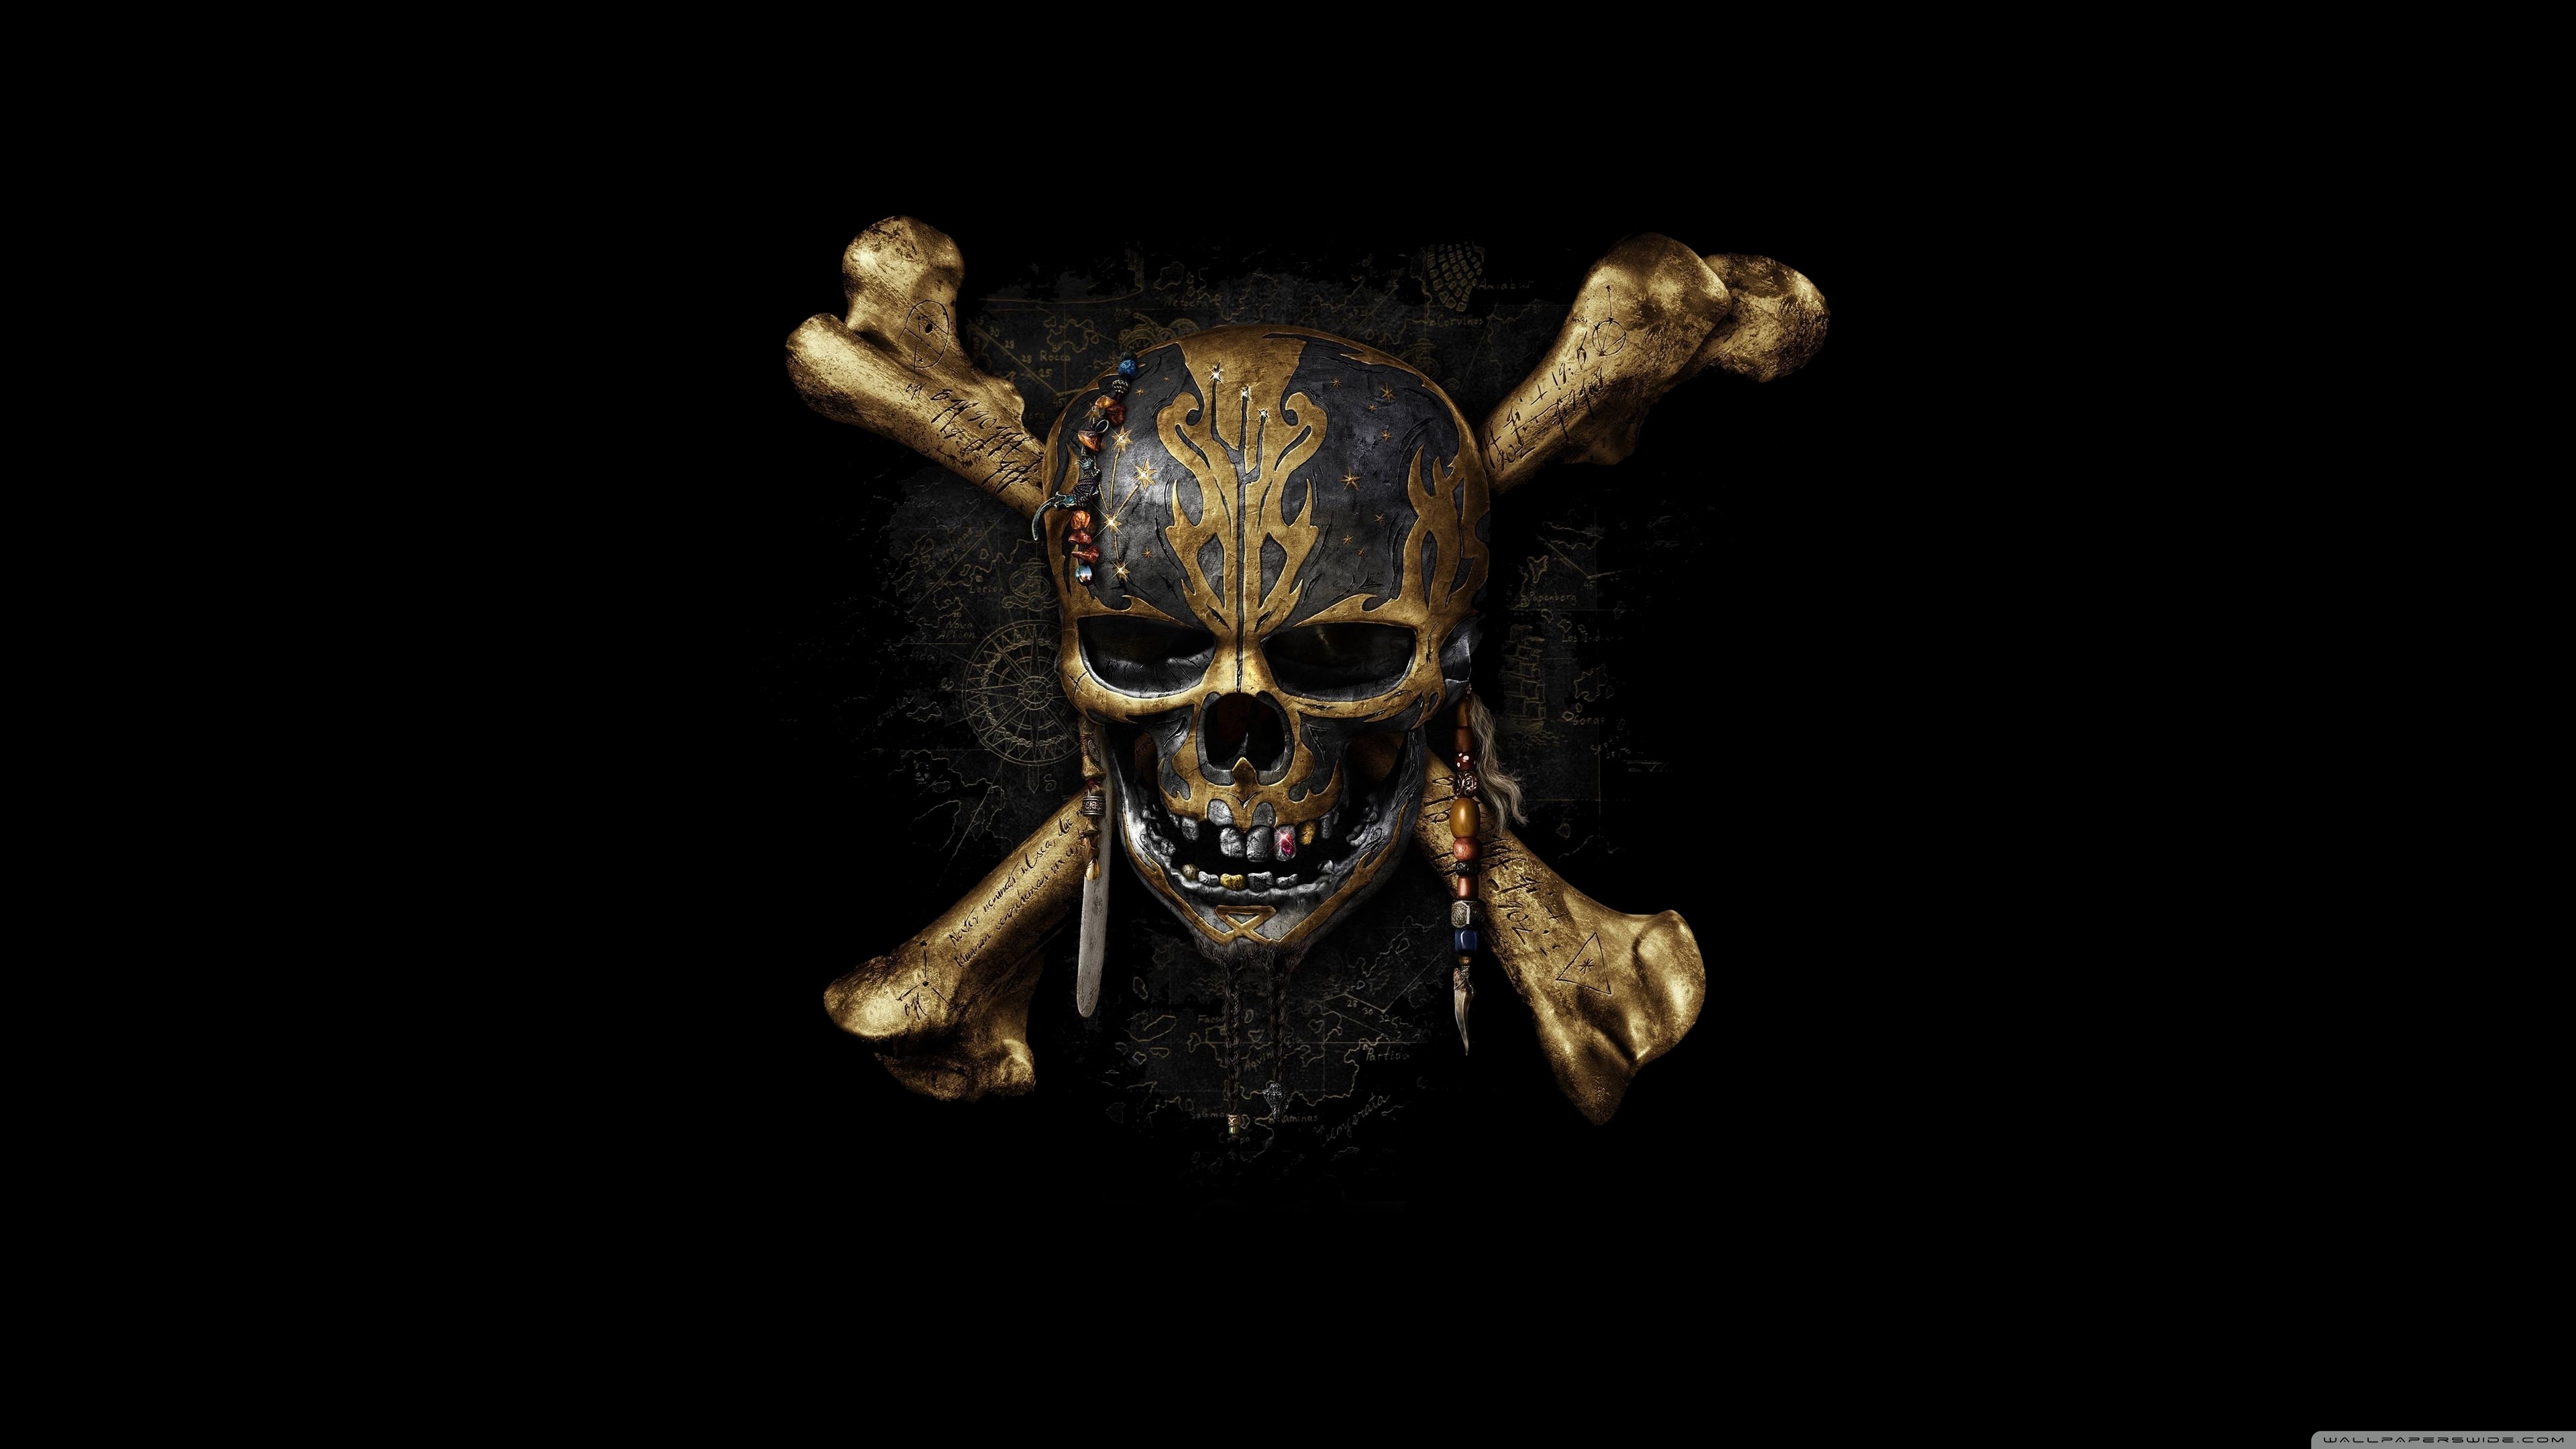 10 New Pirate Of The Caribbean Wallpapers FULL HD 1080p For PC Desktop